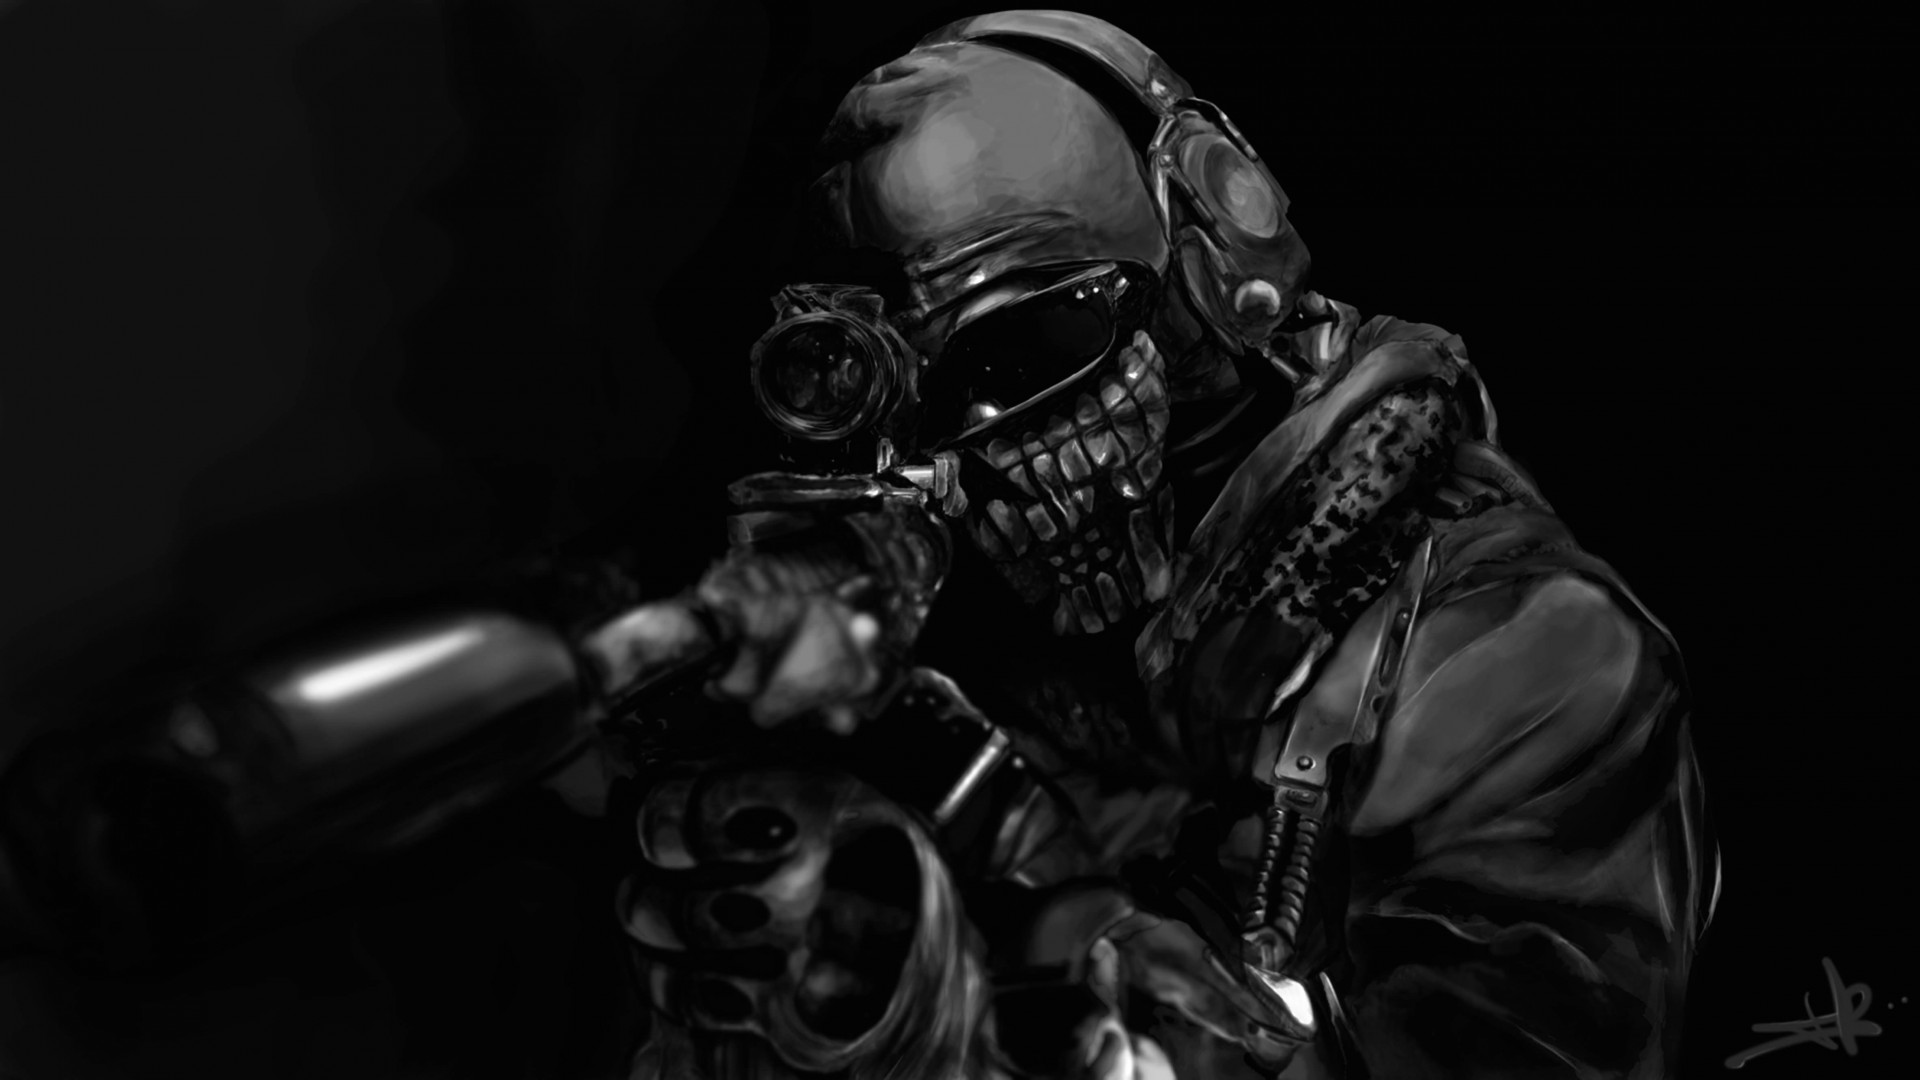 Call of Duty Ghost Masked Warrior Wallpaper for Desktop 1920x1080